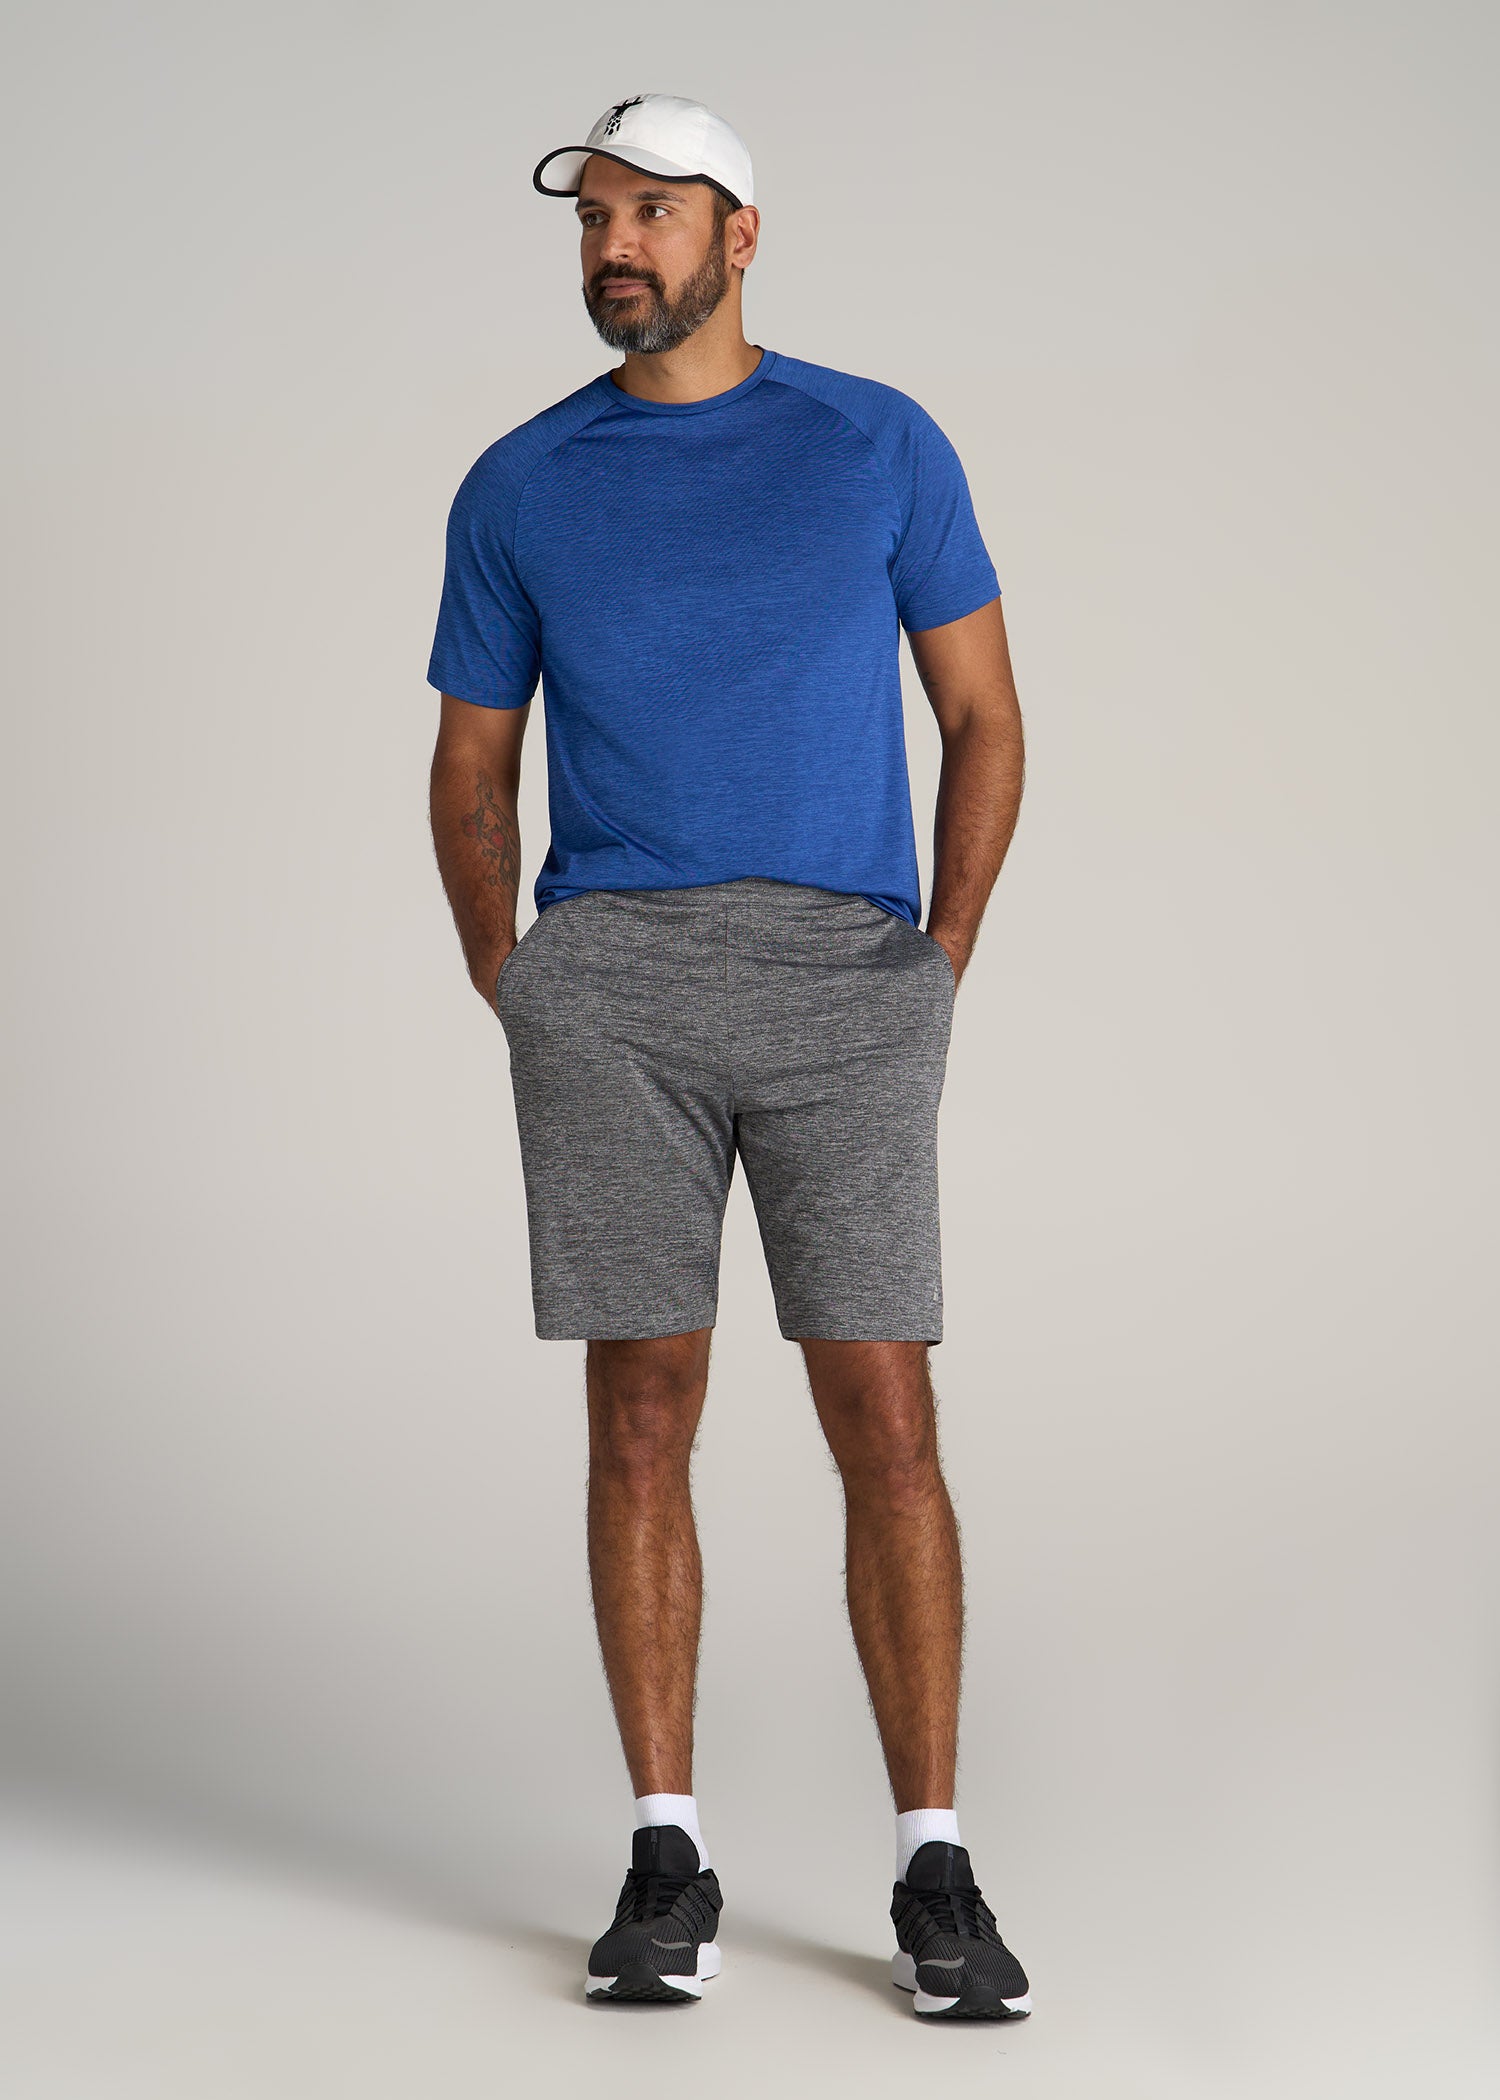 American-Tall-Men-AT-Performance-Engineered-Athletic-Shorts-GreyMix-full